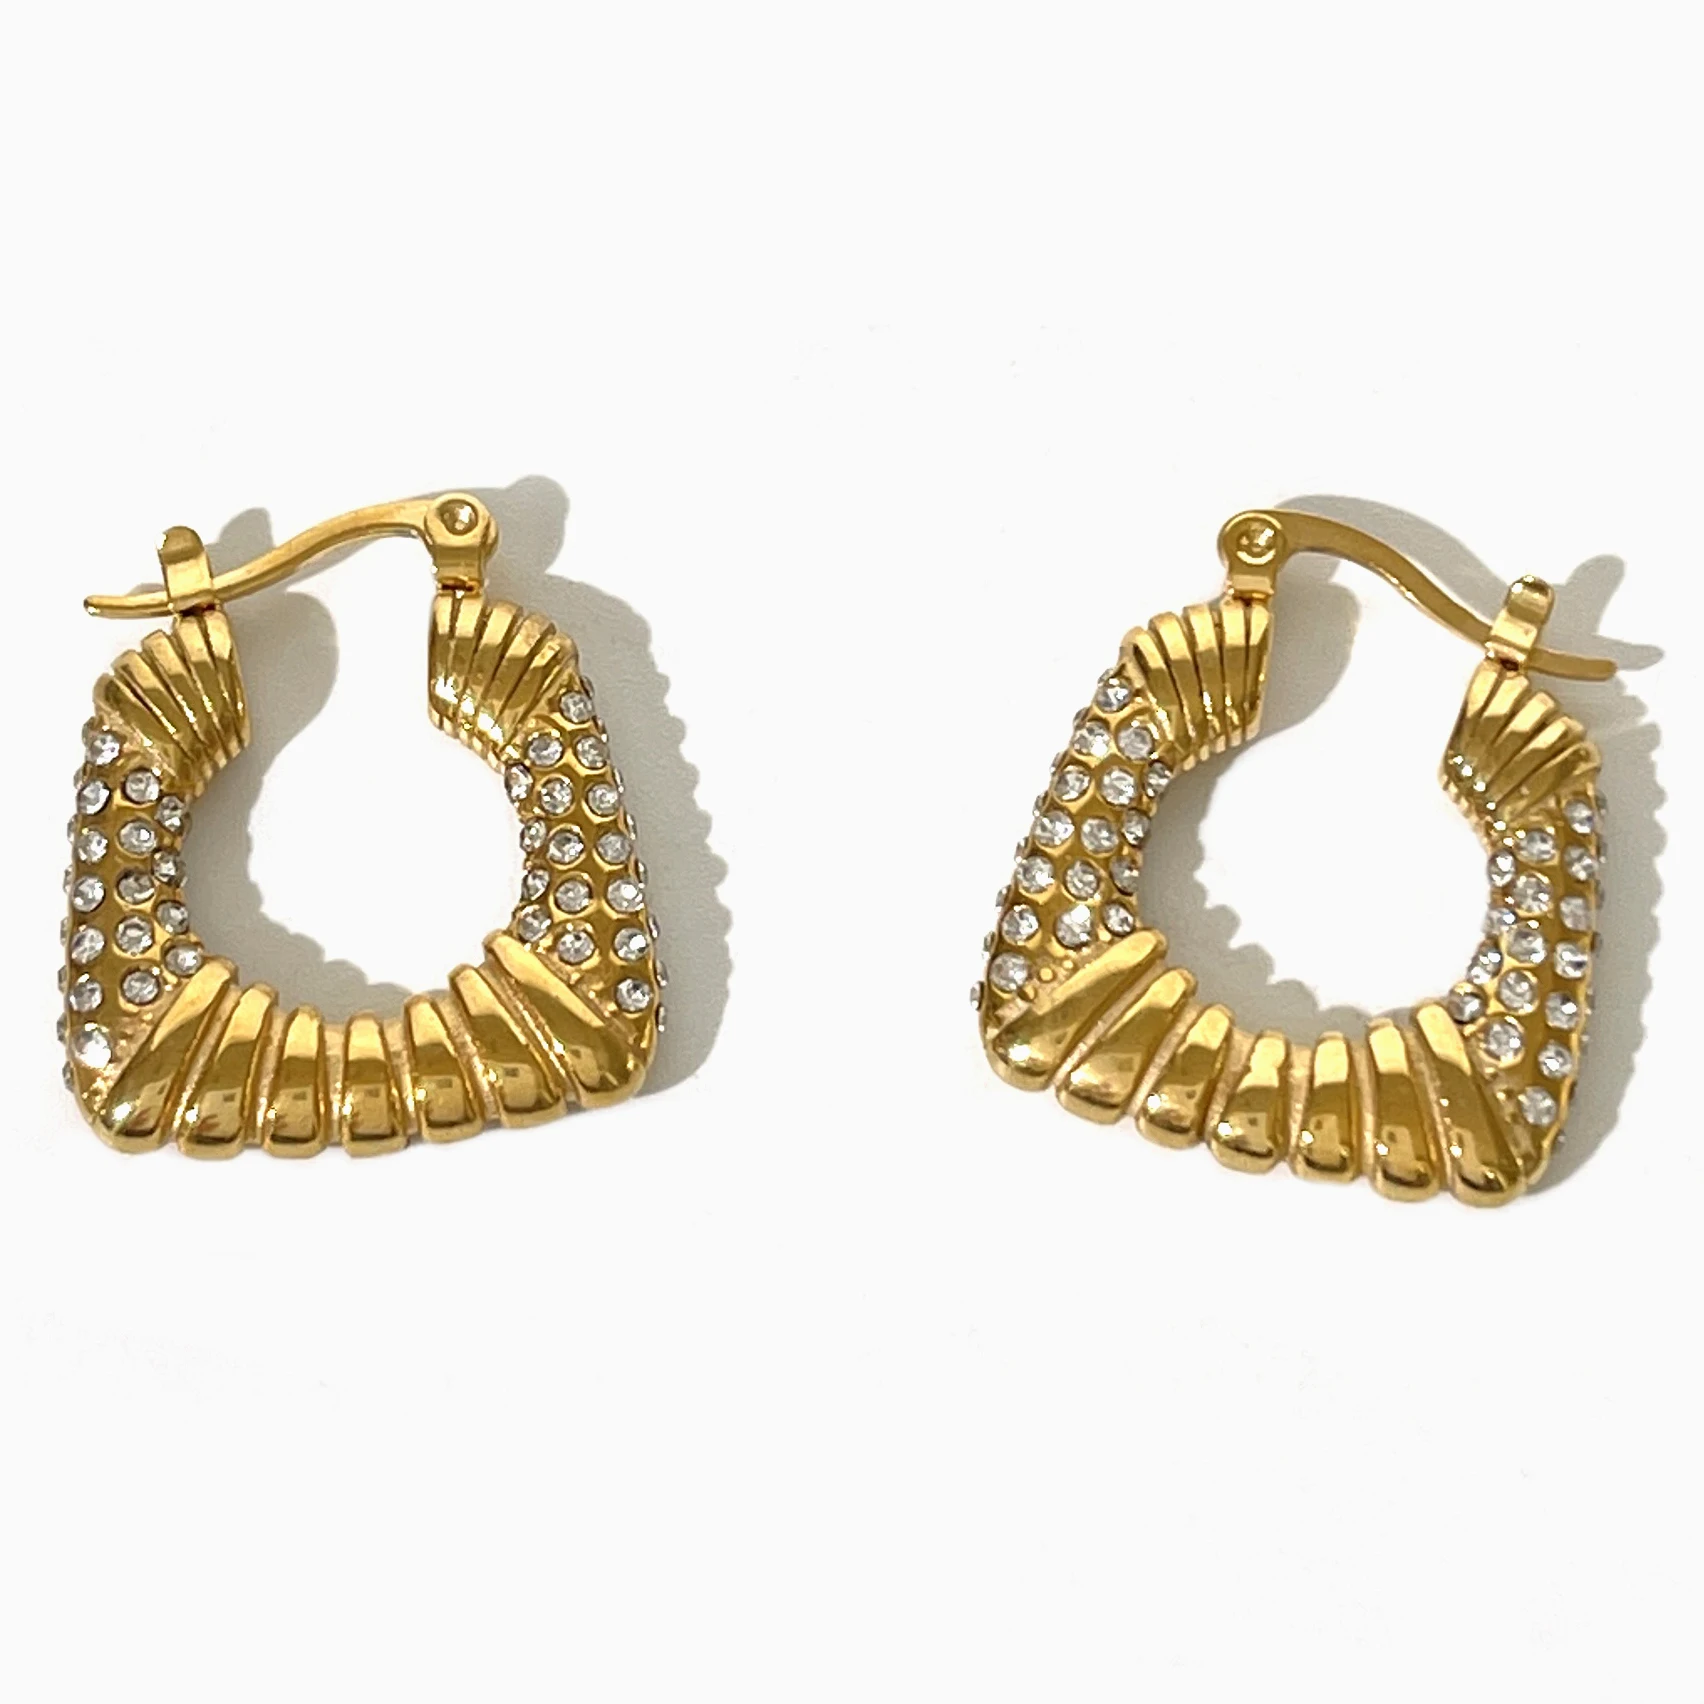 

Peri'sbox Non Fade Pave Cz Crystal 18K Pvd Gold Plated Textured Thick Hoop Earrings Women Chunky Unusual Earring Stainless Steel